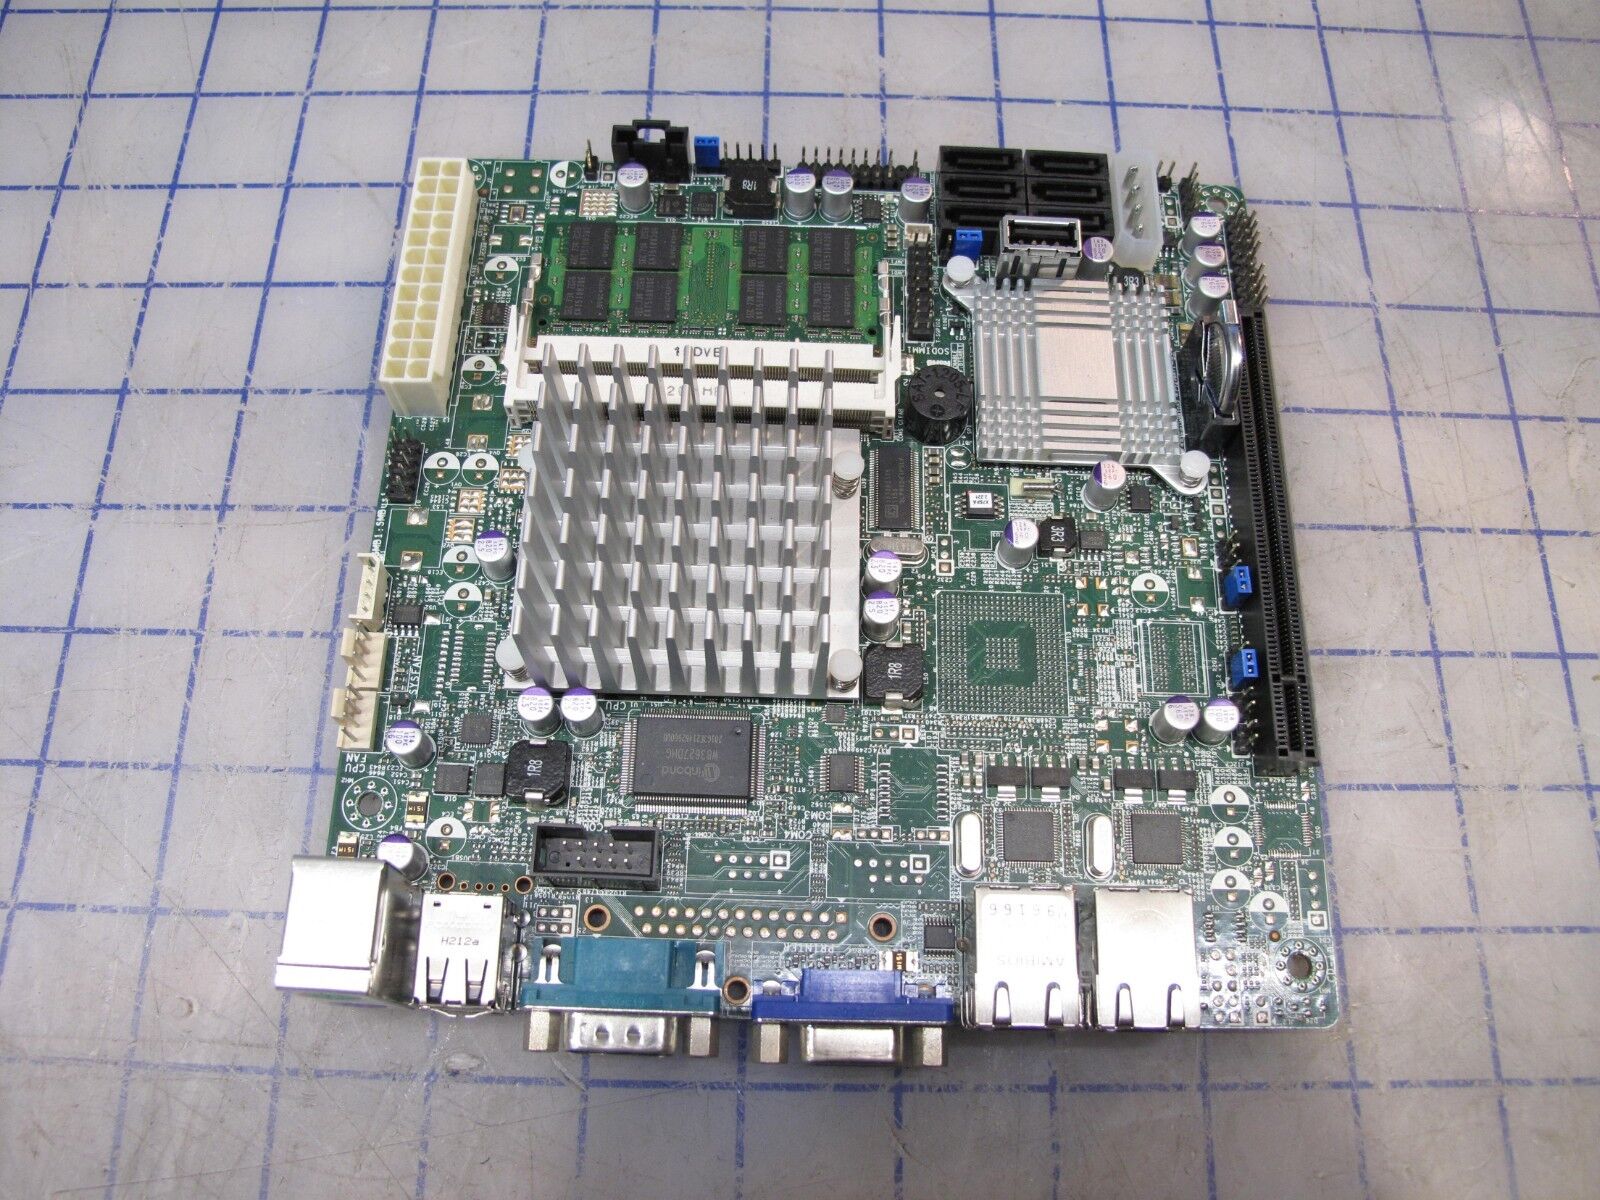 SuperMicro X7SPA-H MOTHERBOARD WITH Intel Atom D510 CPU AND 1GB RAM